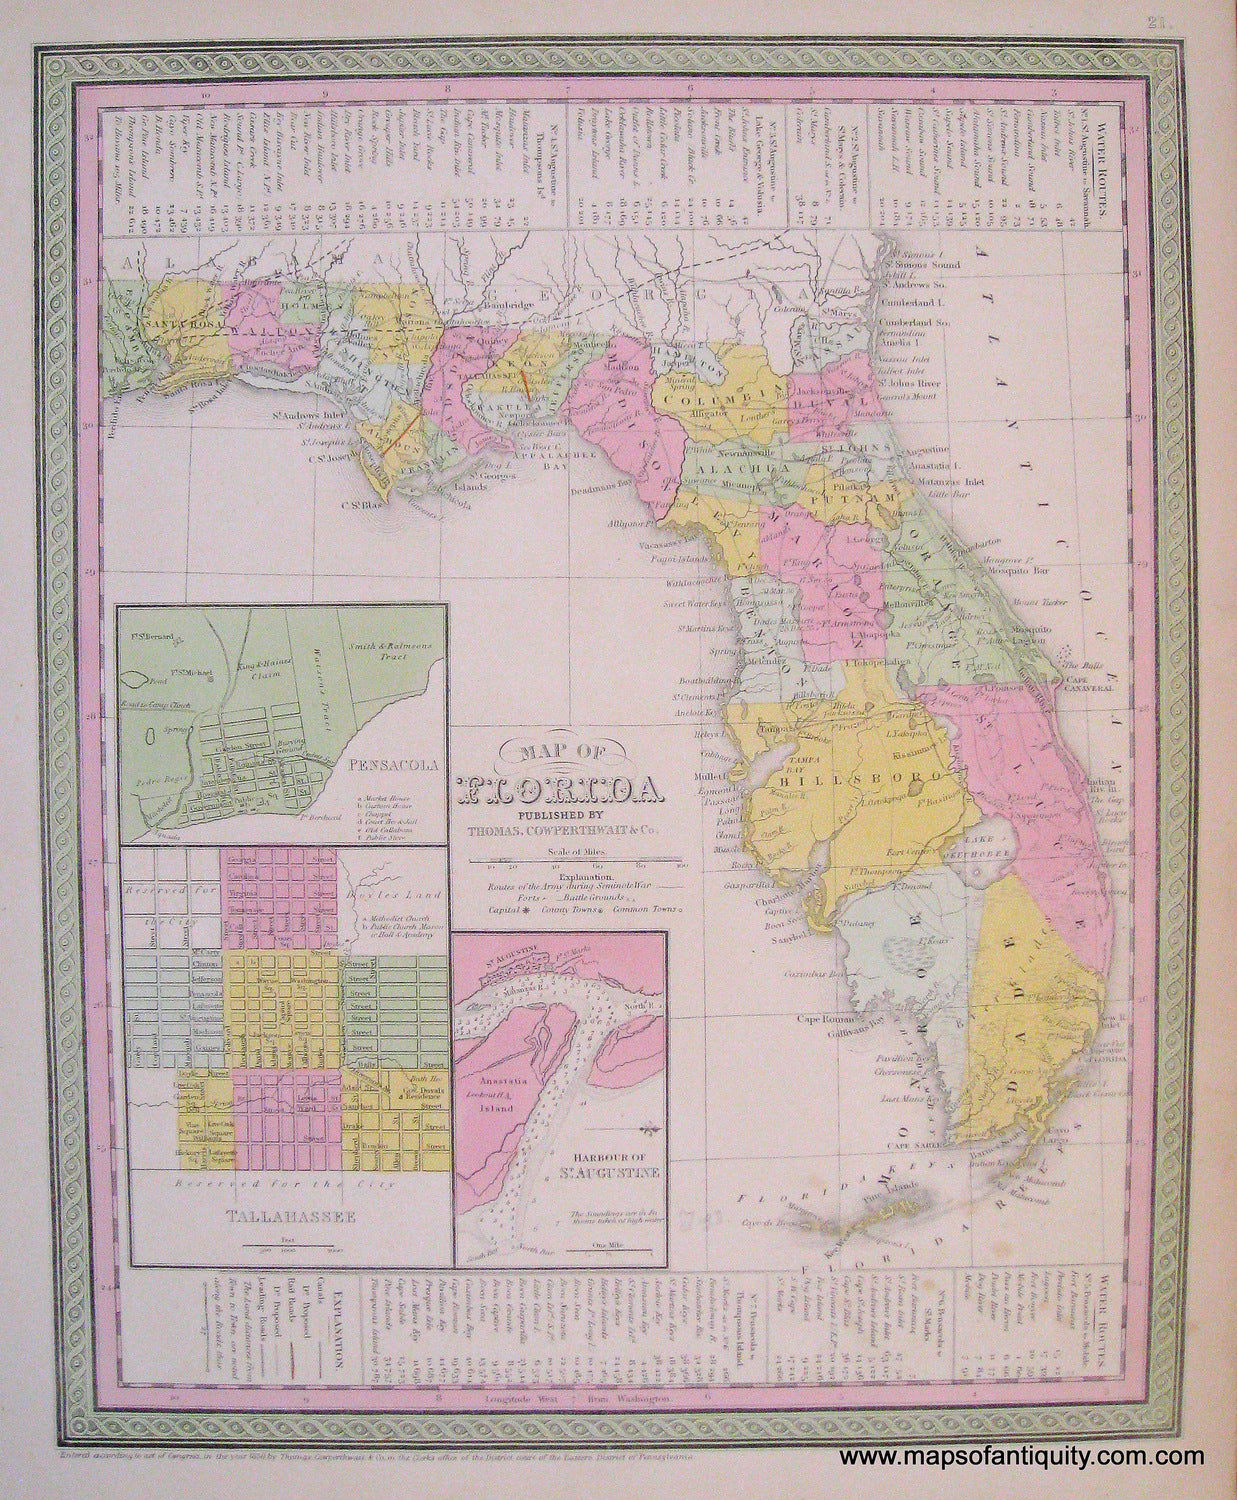 Antique-Hand-Colored-Map-Map-of-Florida.-**********-United-States-South-1854-Mitchell/Cowperthwait-Desilver-&-Butler-Maps-Of-Antiquity